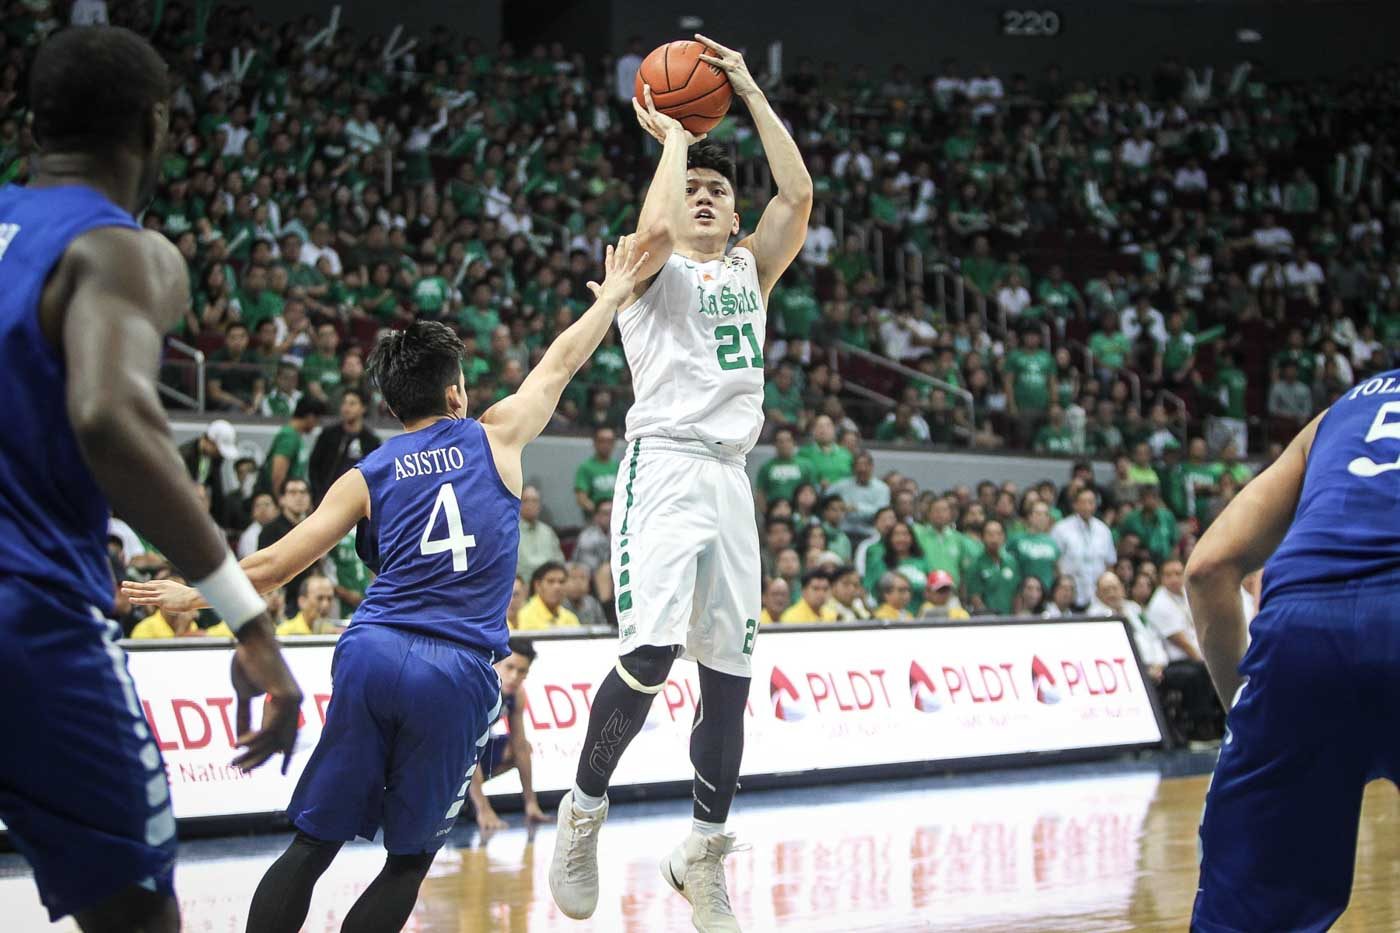 La Salle survives Ateneo rally for 1-0 UAAP Finals lead